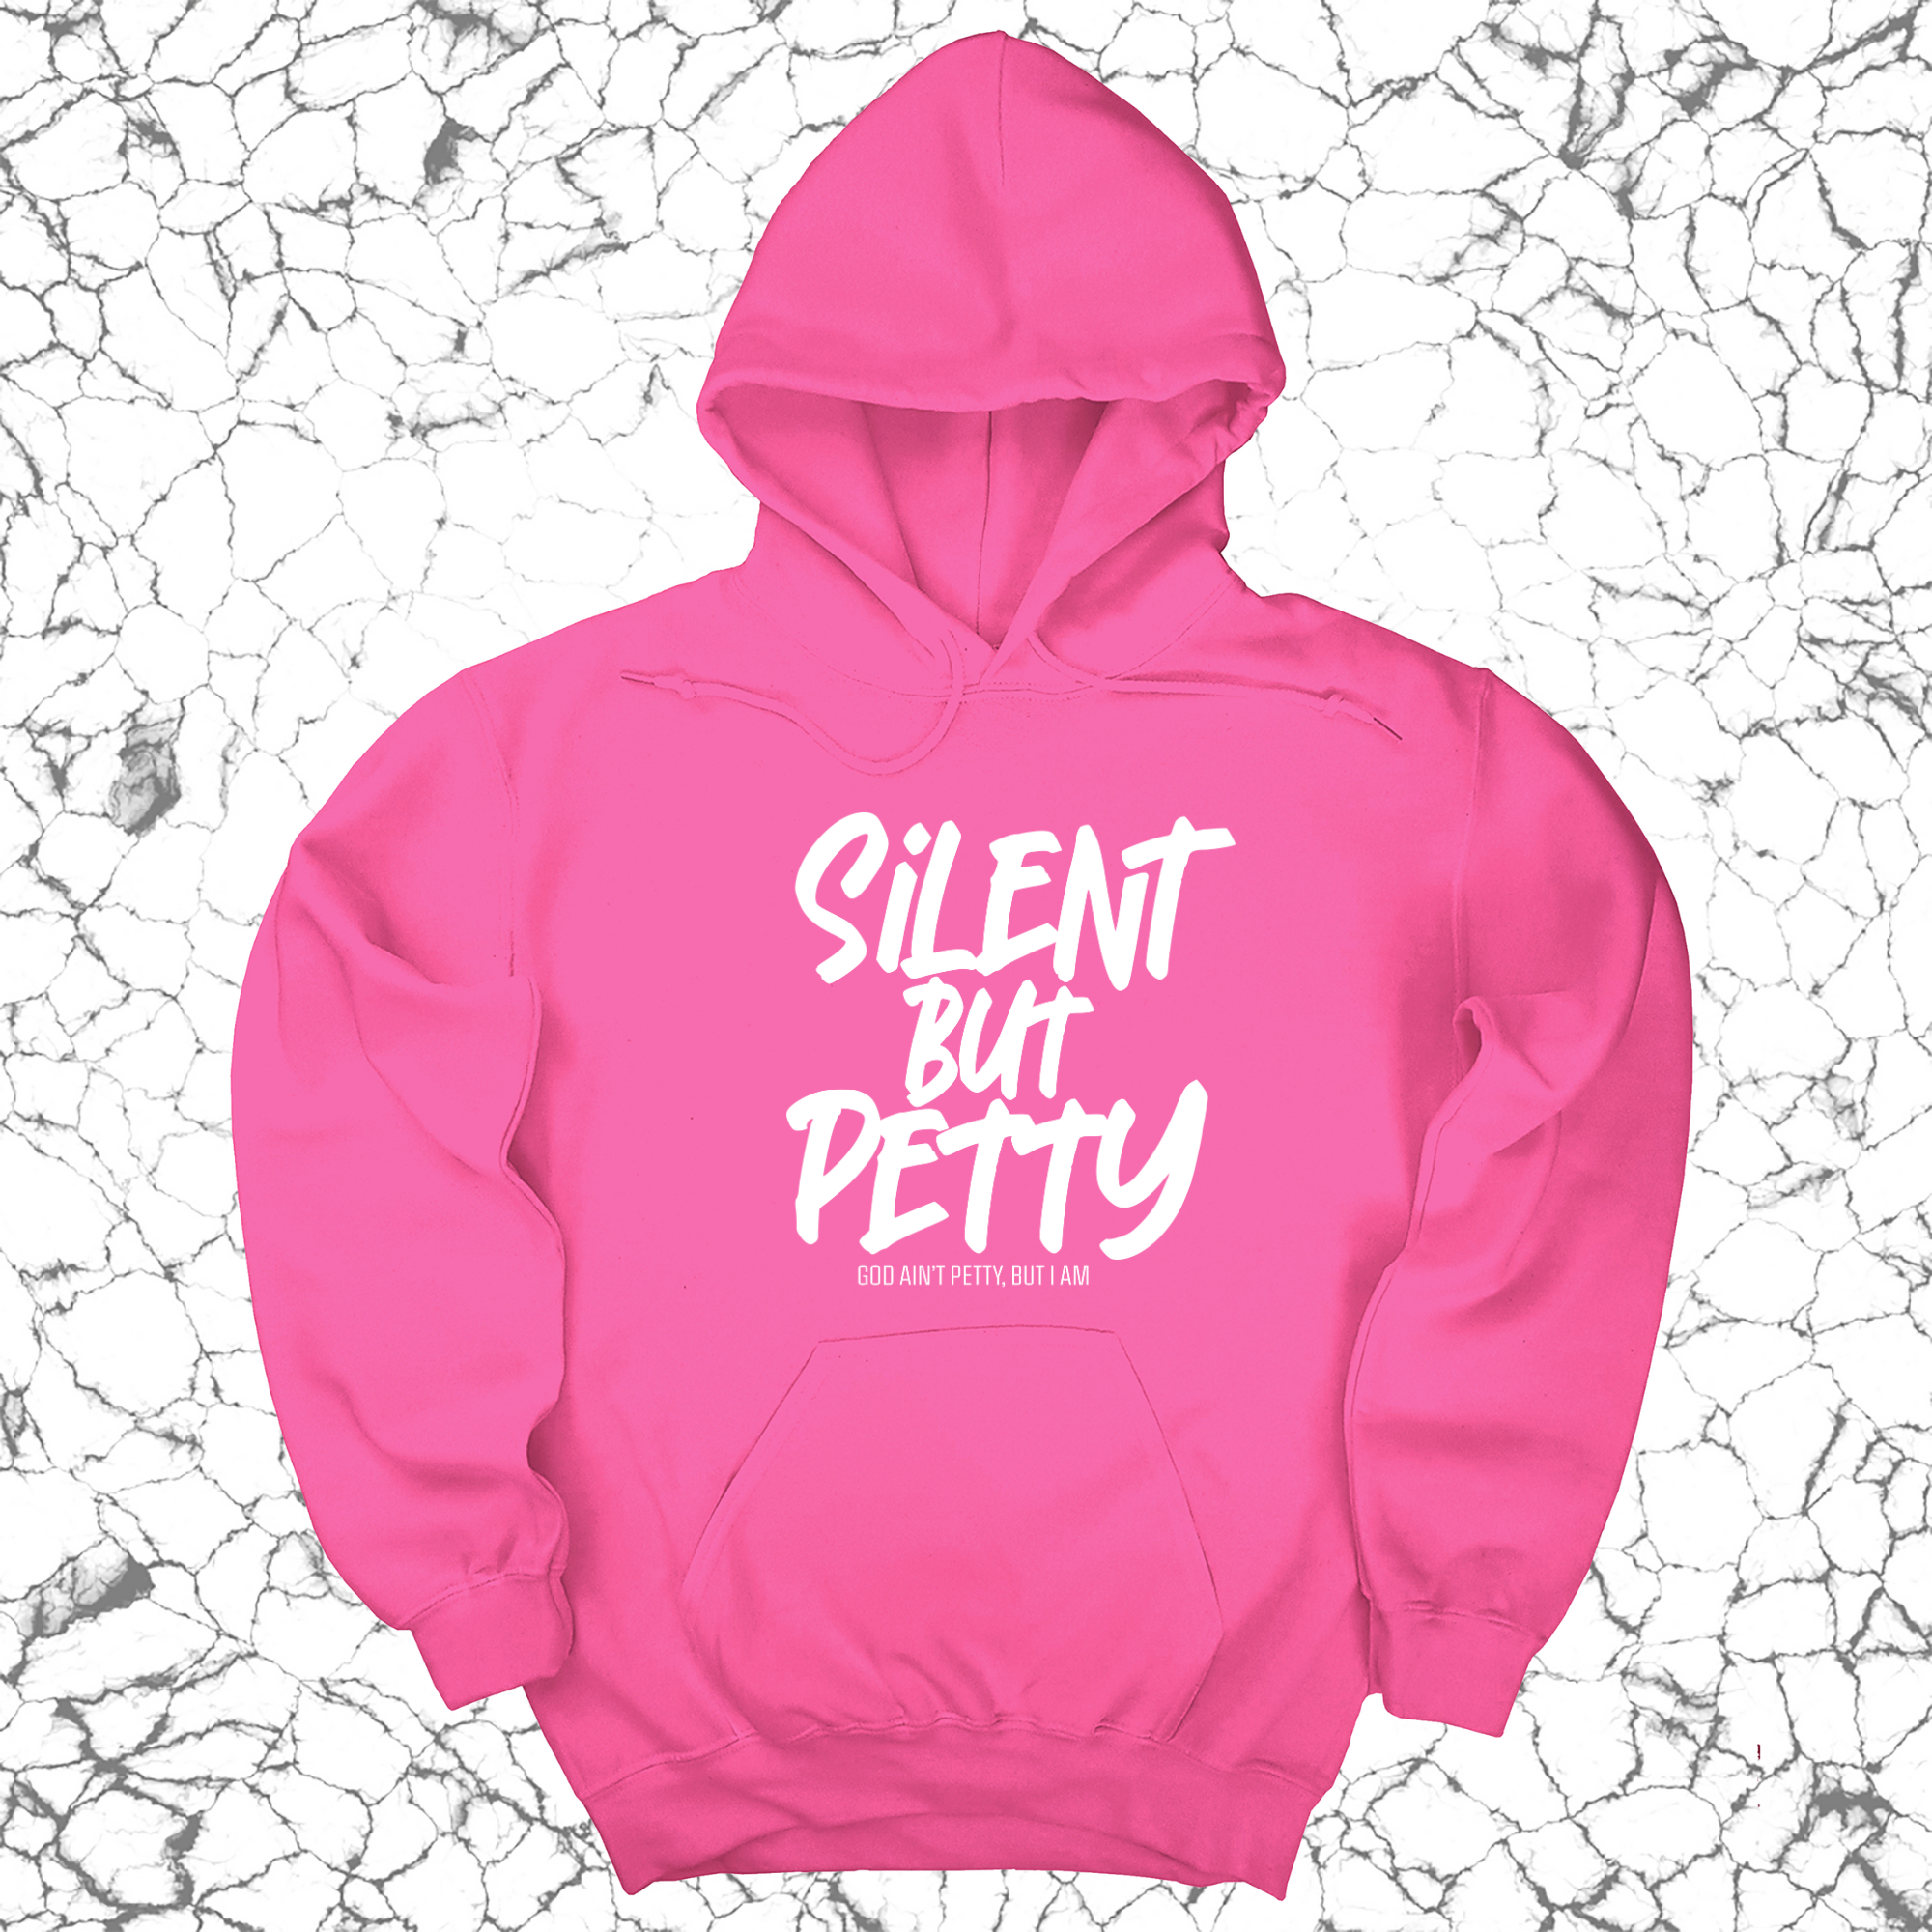 Silent but Petty Unisex Hoodie-Hoodie-The Original God Ain't Petty But I Am